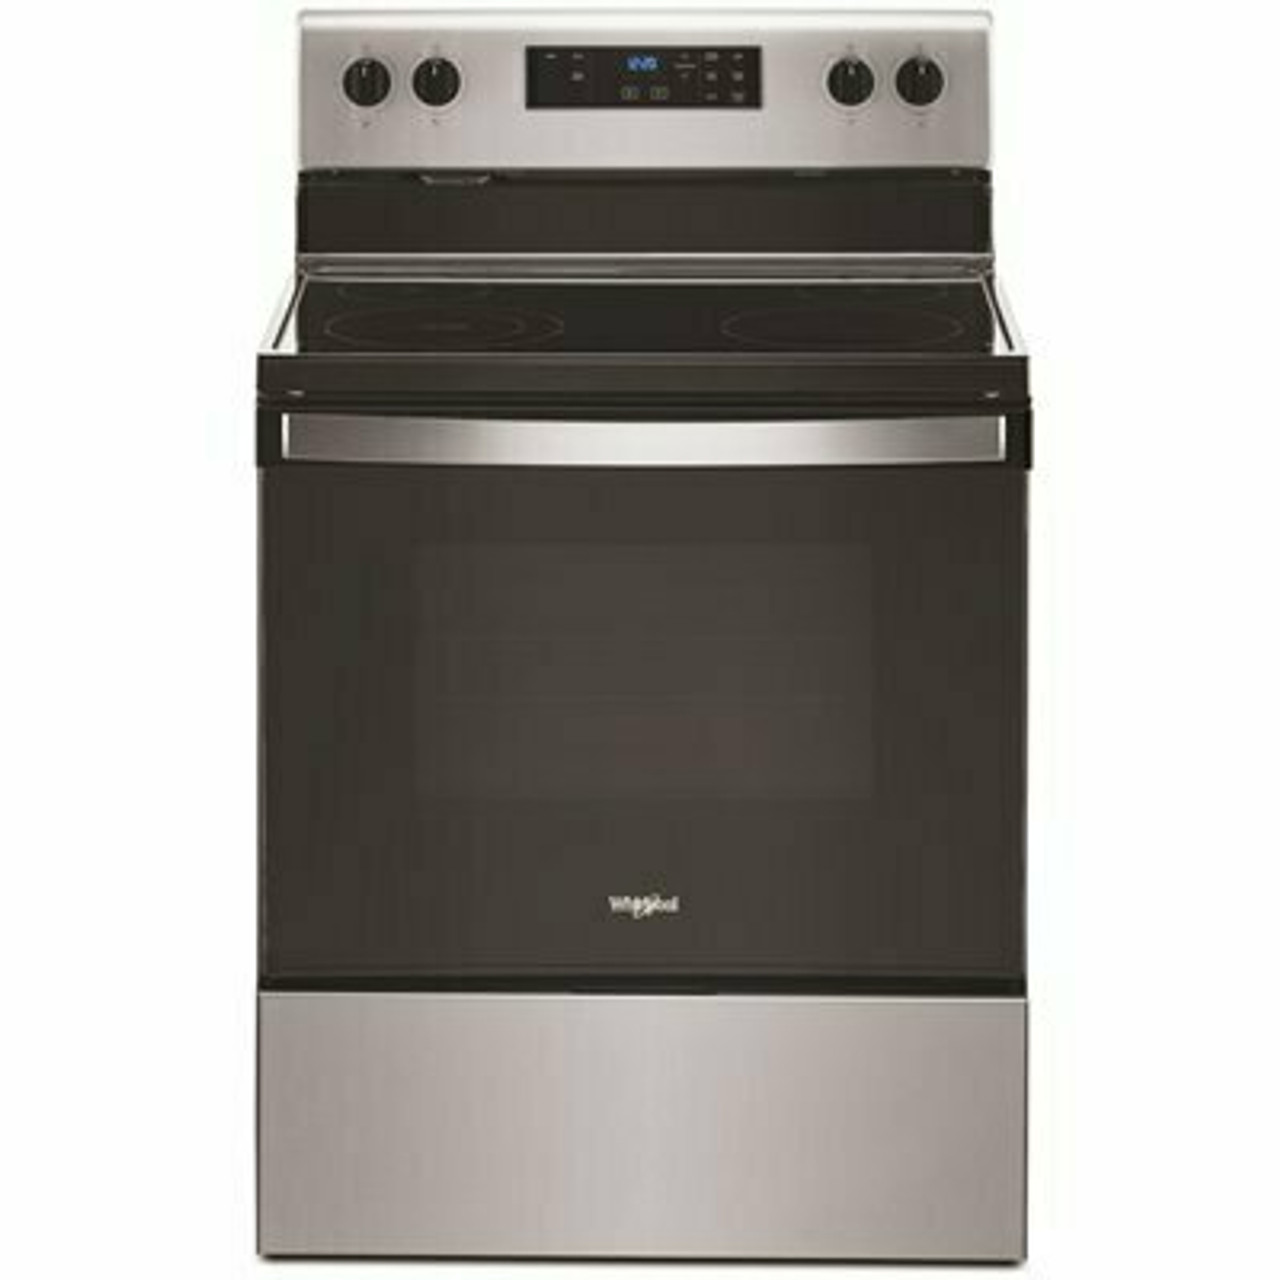 Whirlpool 30 In. 5.3 Cu. Ft. 4-Burner Electric Range In Stainless Steel With Storage Drawer